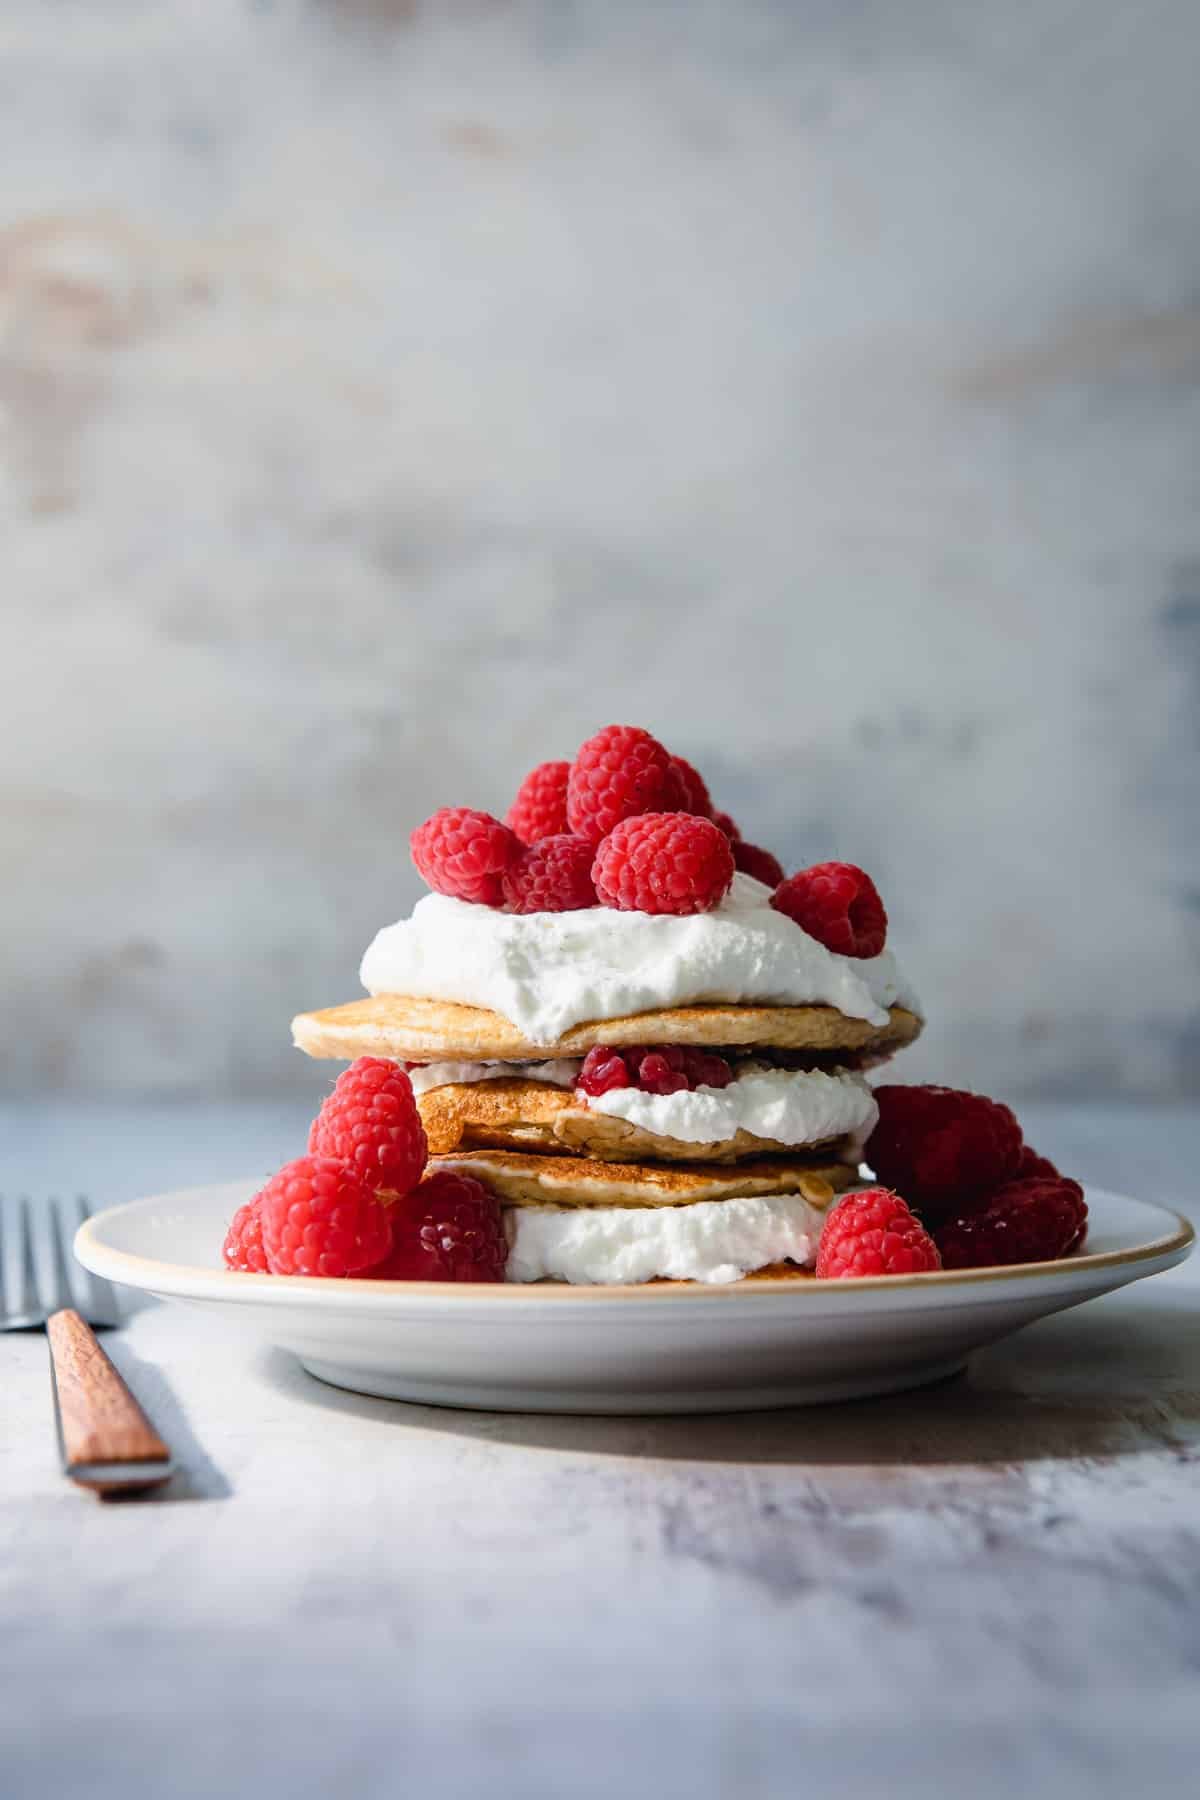 A stack of oatmeal pancakes on a plate.